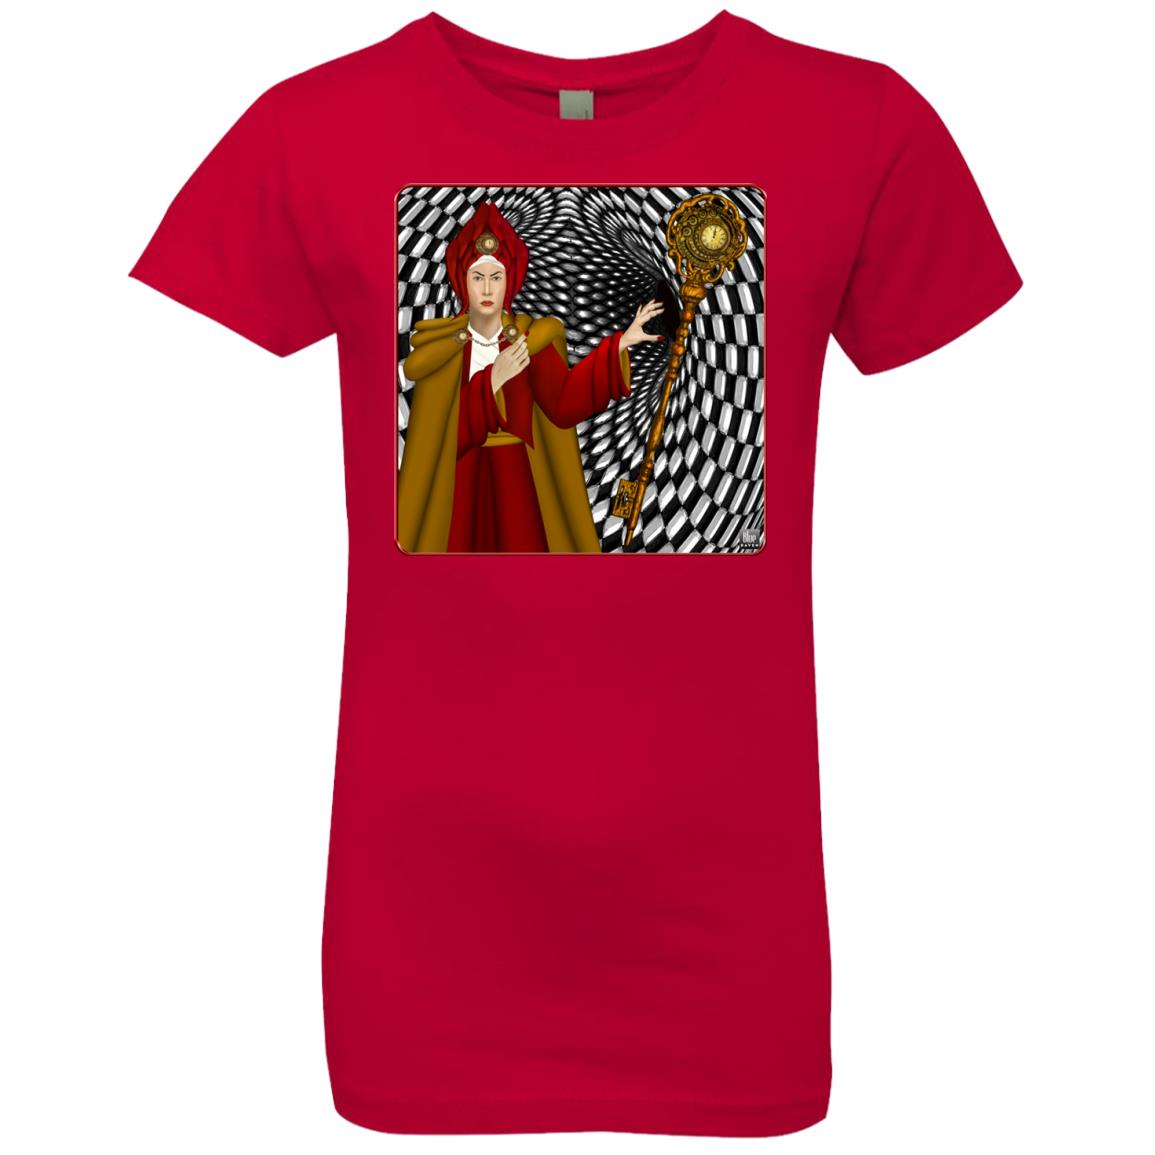 PORTRAIT OF THE RED QUEEN - Girl's Premium Cotton T-Shirt